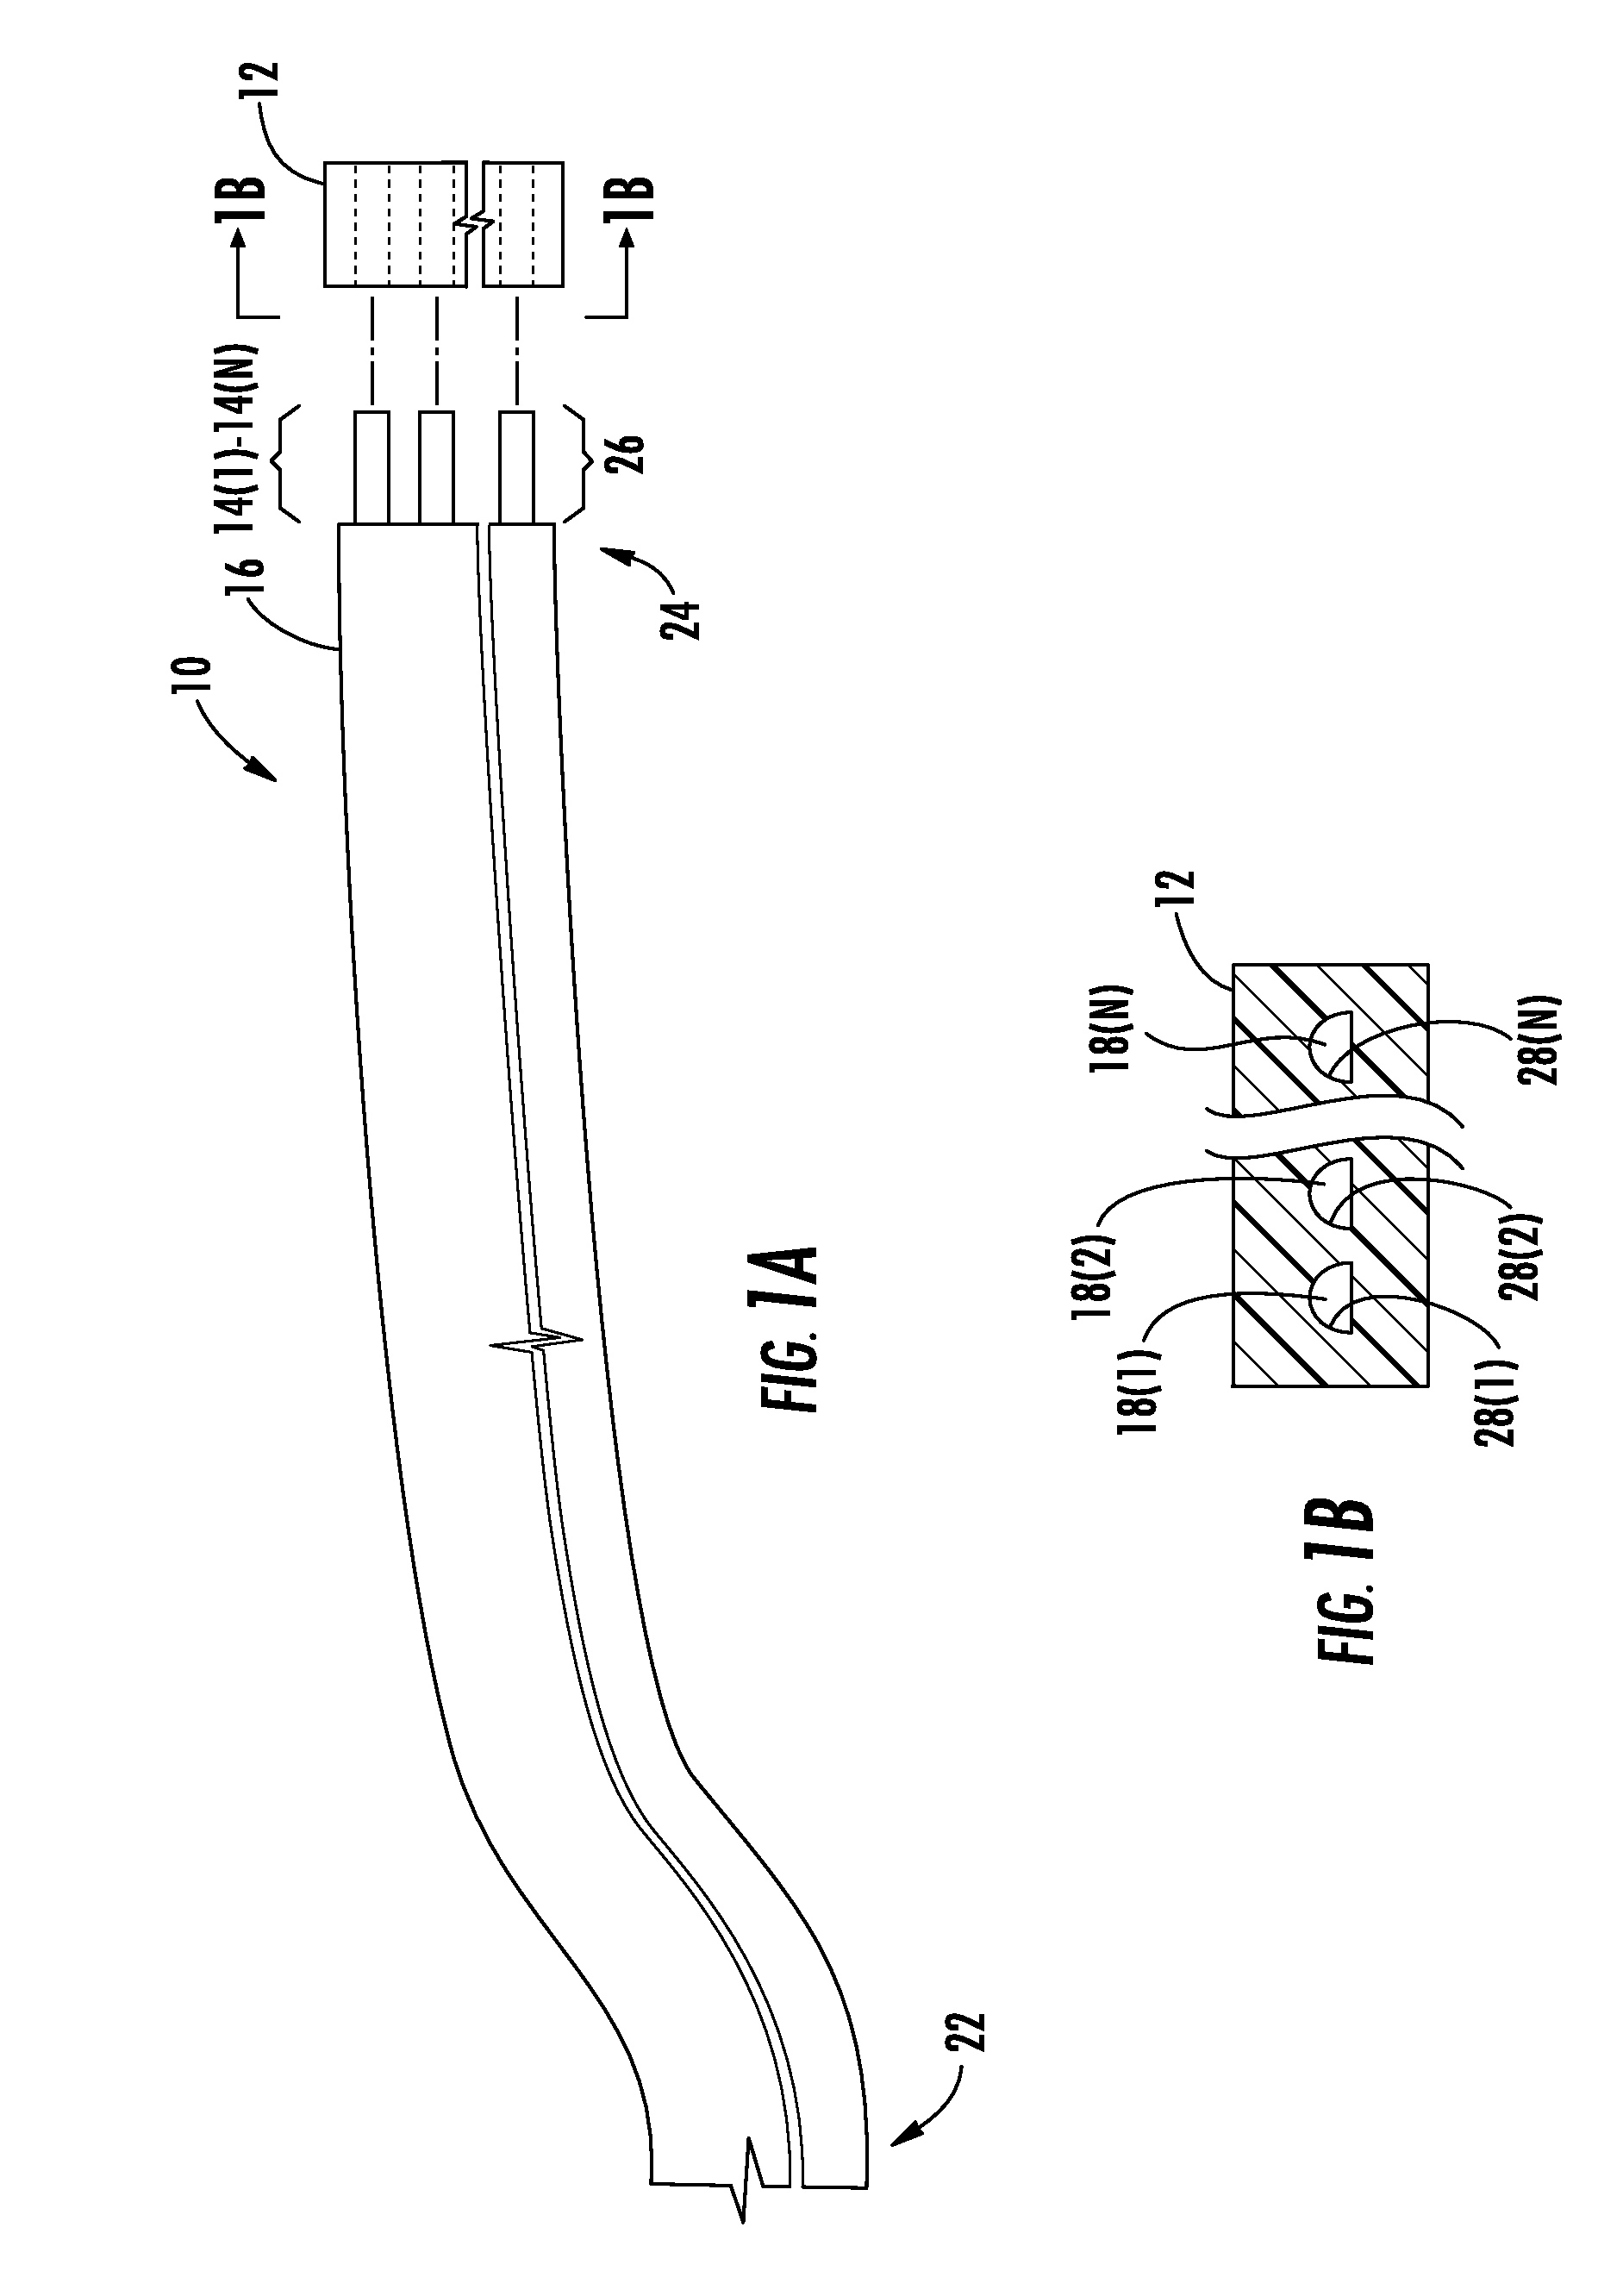 Angular alignment of optical fibers for fiber optic ribbon cables, and related methods